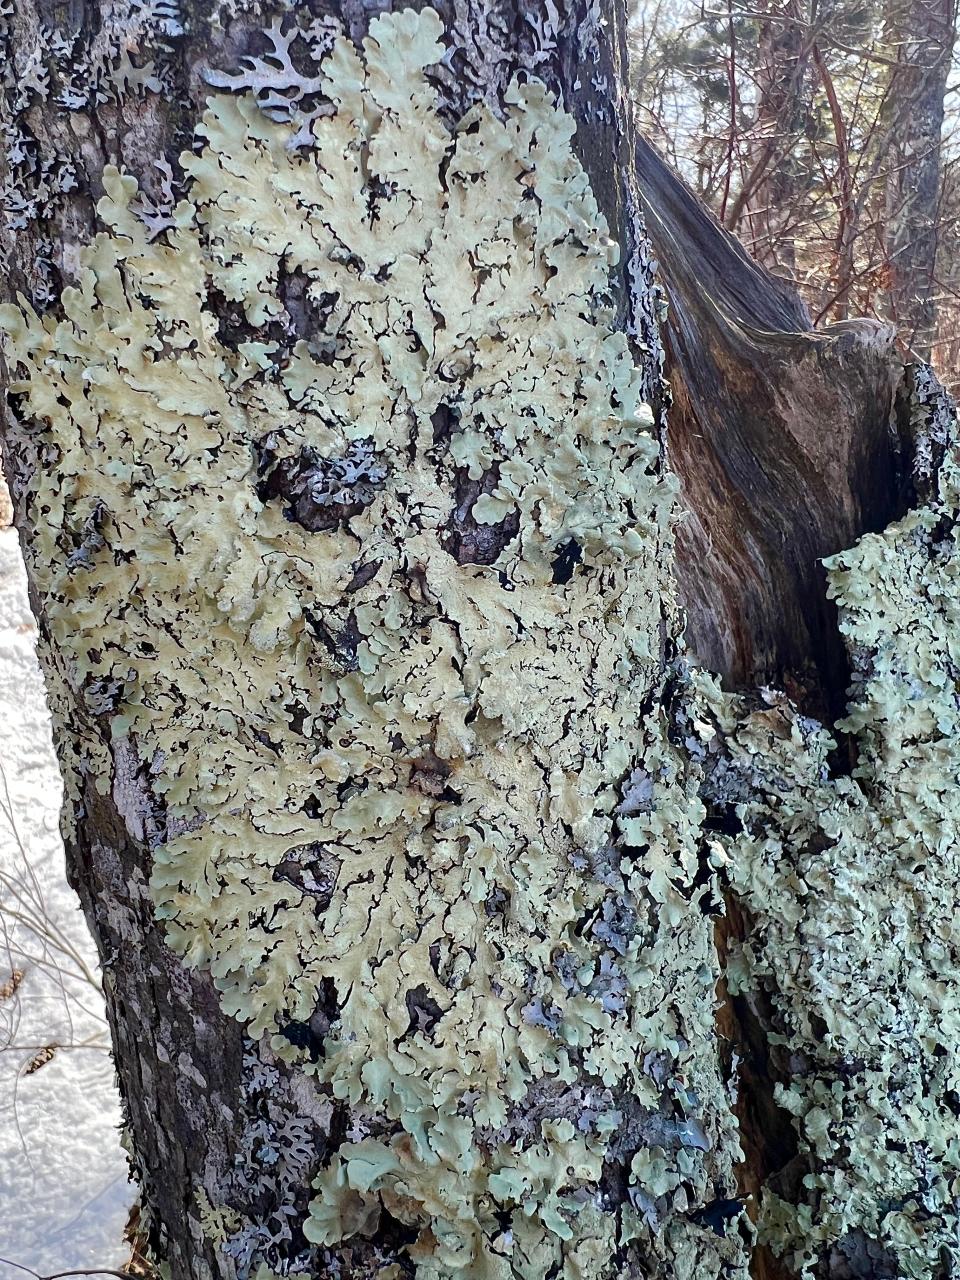 This image shows a common greenshield lichen, which grows on the bark of trees and occasionally on rocks.